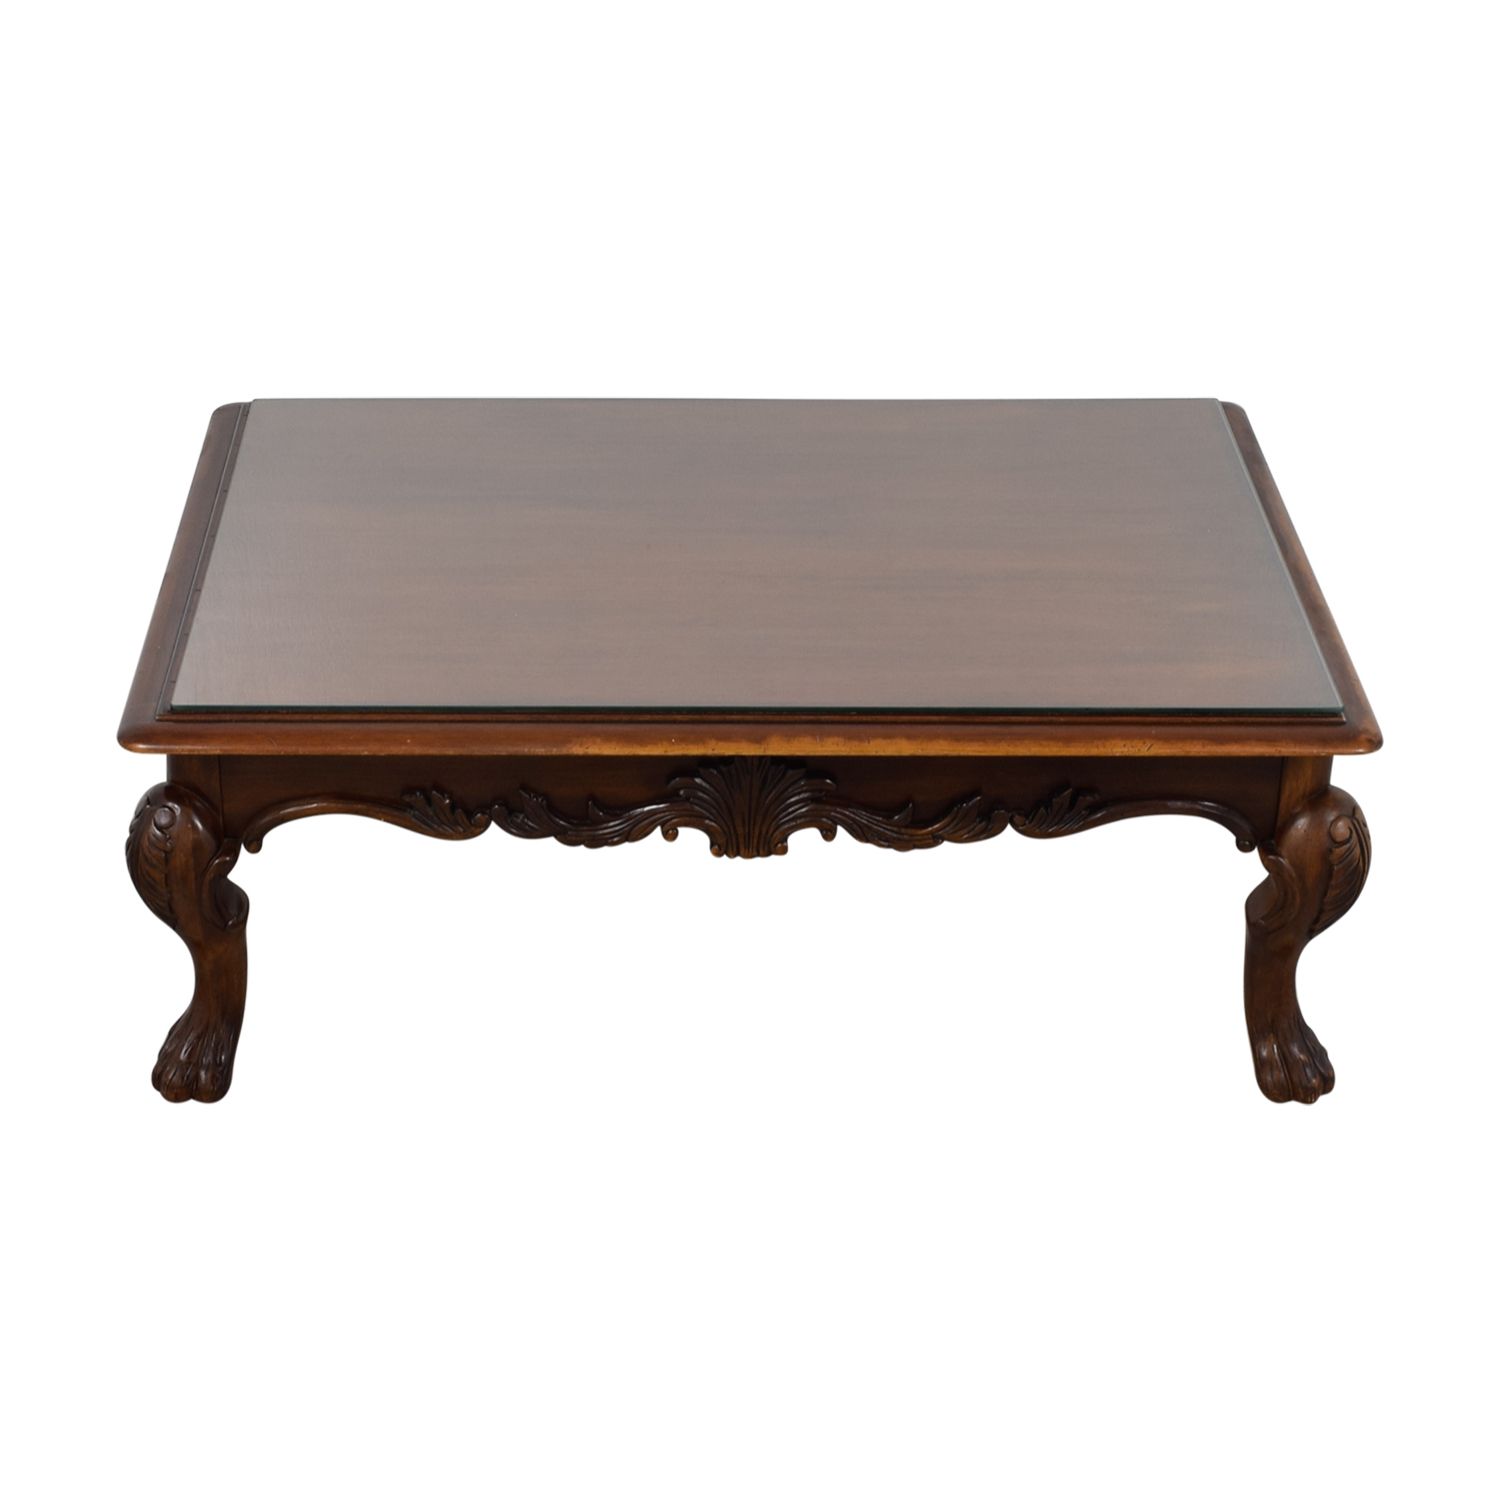 [%fashionable Rectangular Glass Top Coffee Tables Regarding 75% Off – Rectangular Carved Wood Coffee Table With Glass|75% Off – Rectangular Carved Wood Coffee Table With Glass Intended For Current Rectangular Glass Top Coffee Tables%] (Gallery 10 of 20)